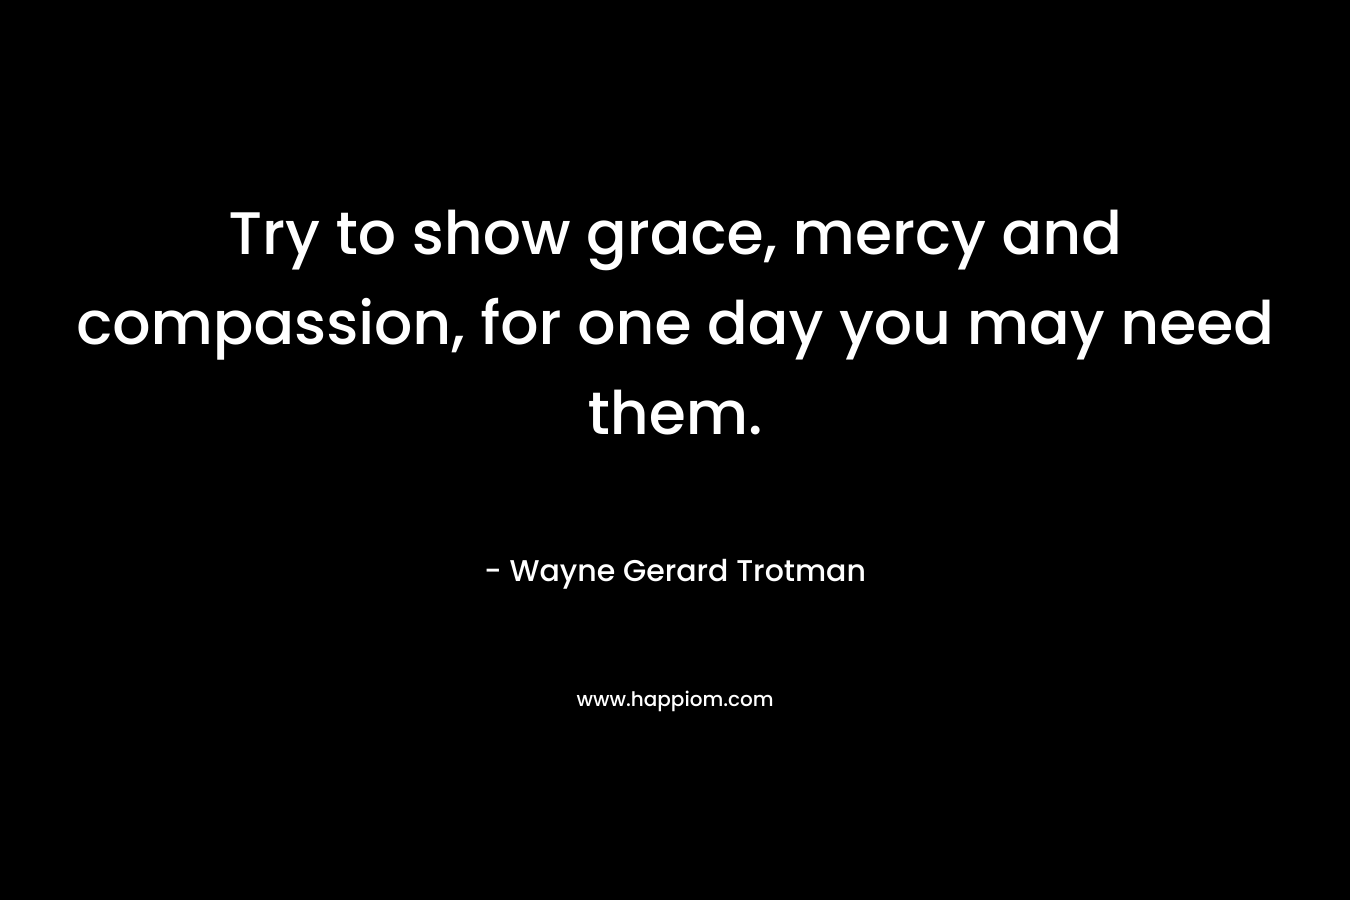 Try to show grace, mercy and compassion, for one day you may need them.